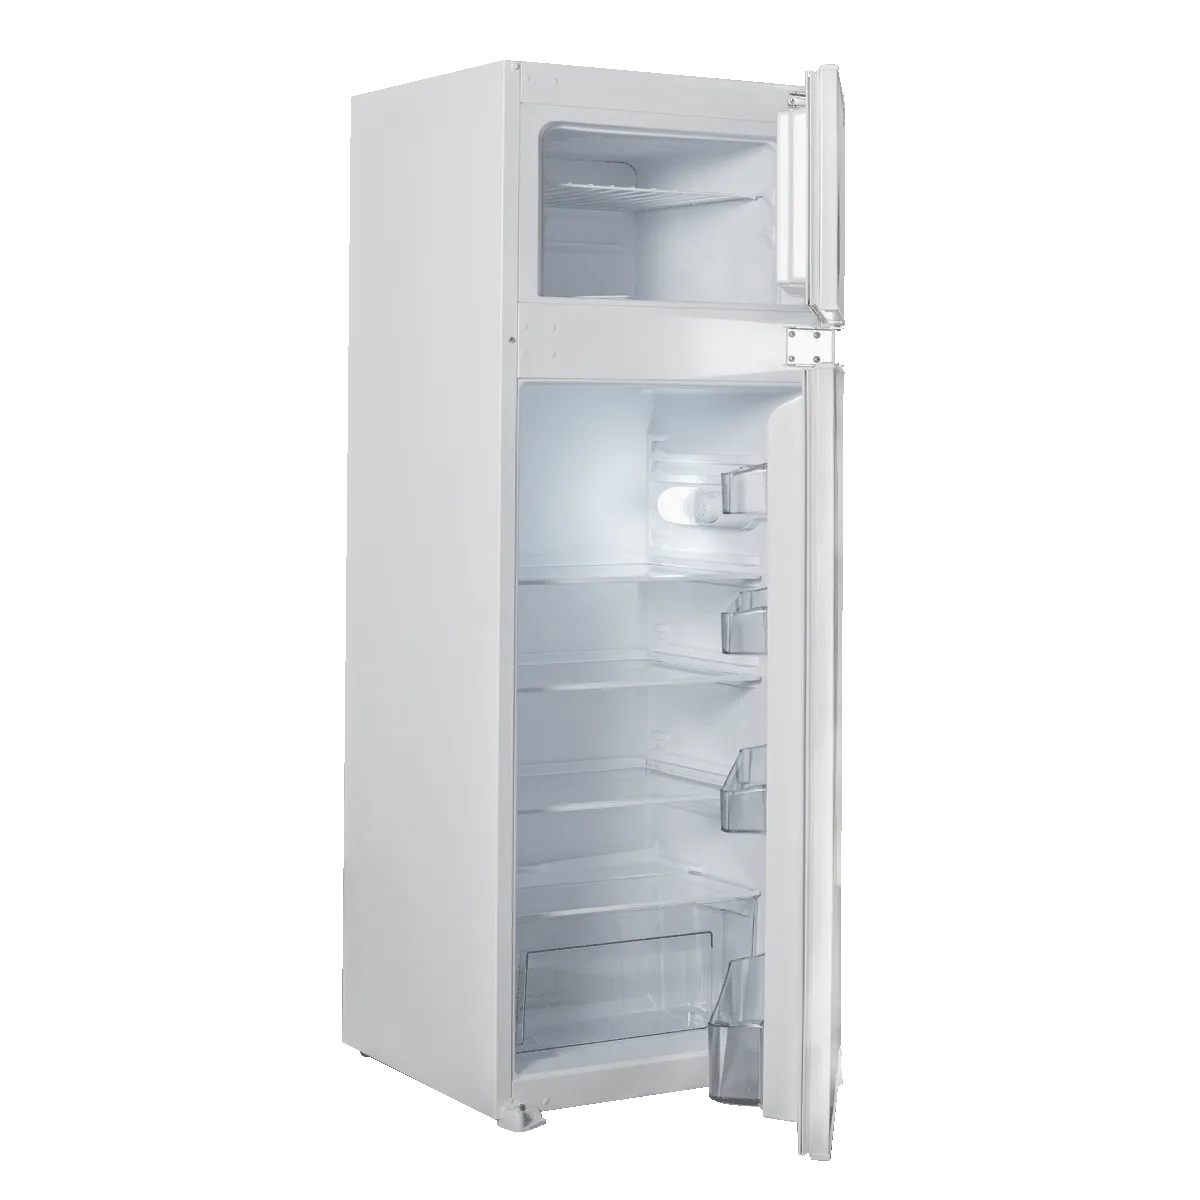 Built-in combined refrigerator IKG 2600F 